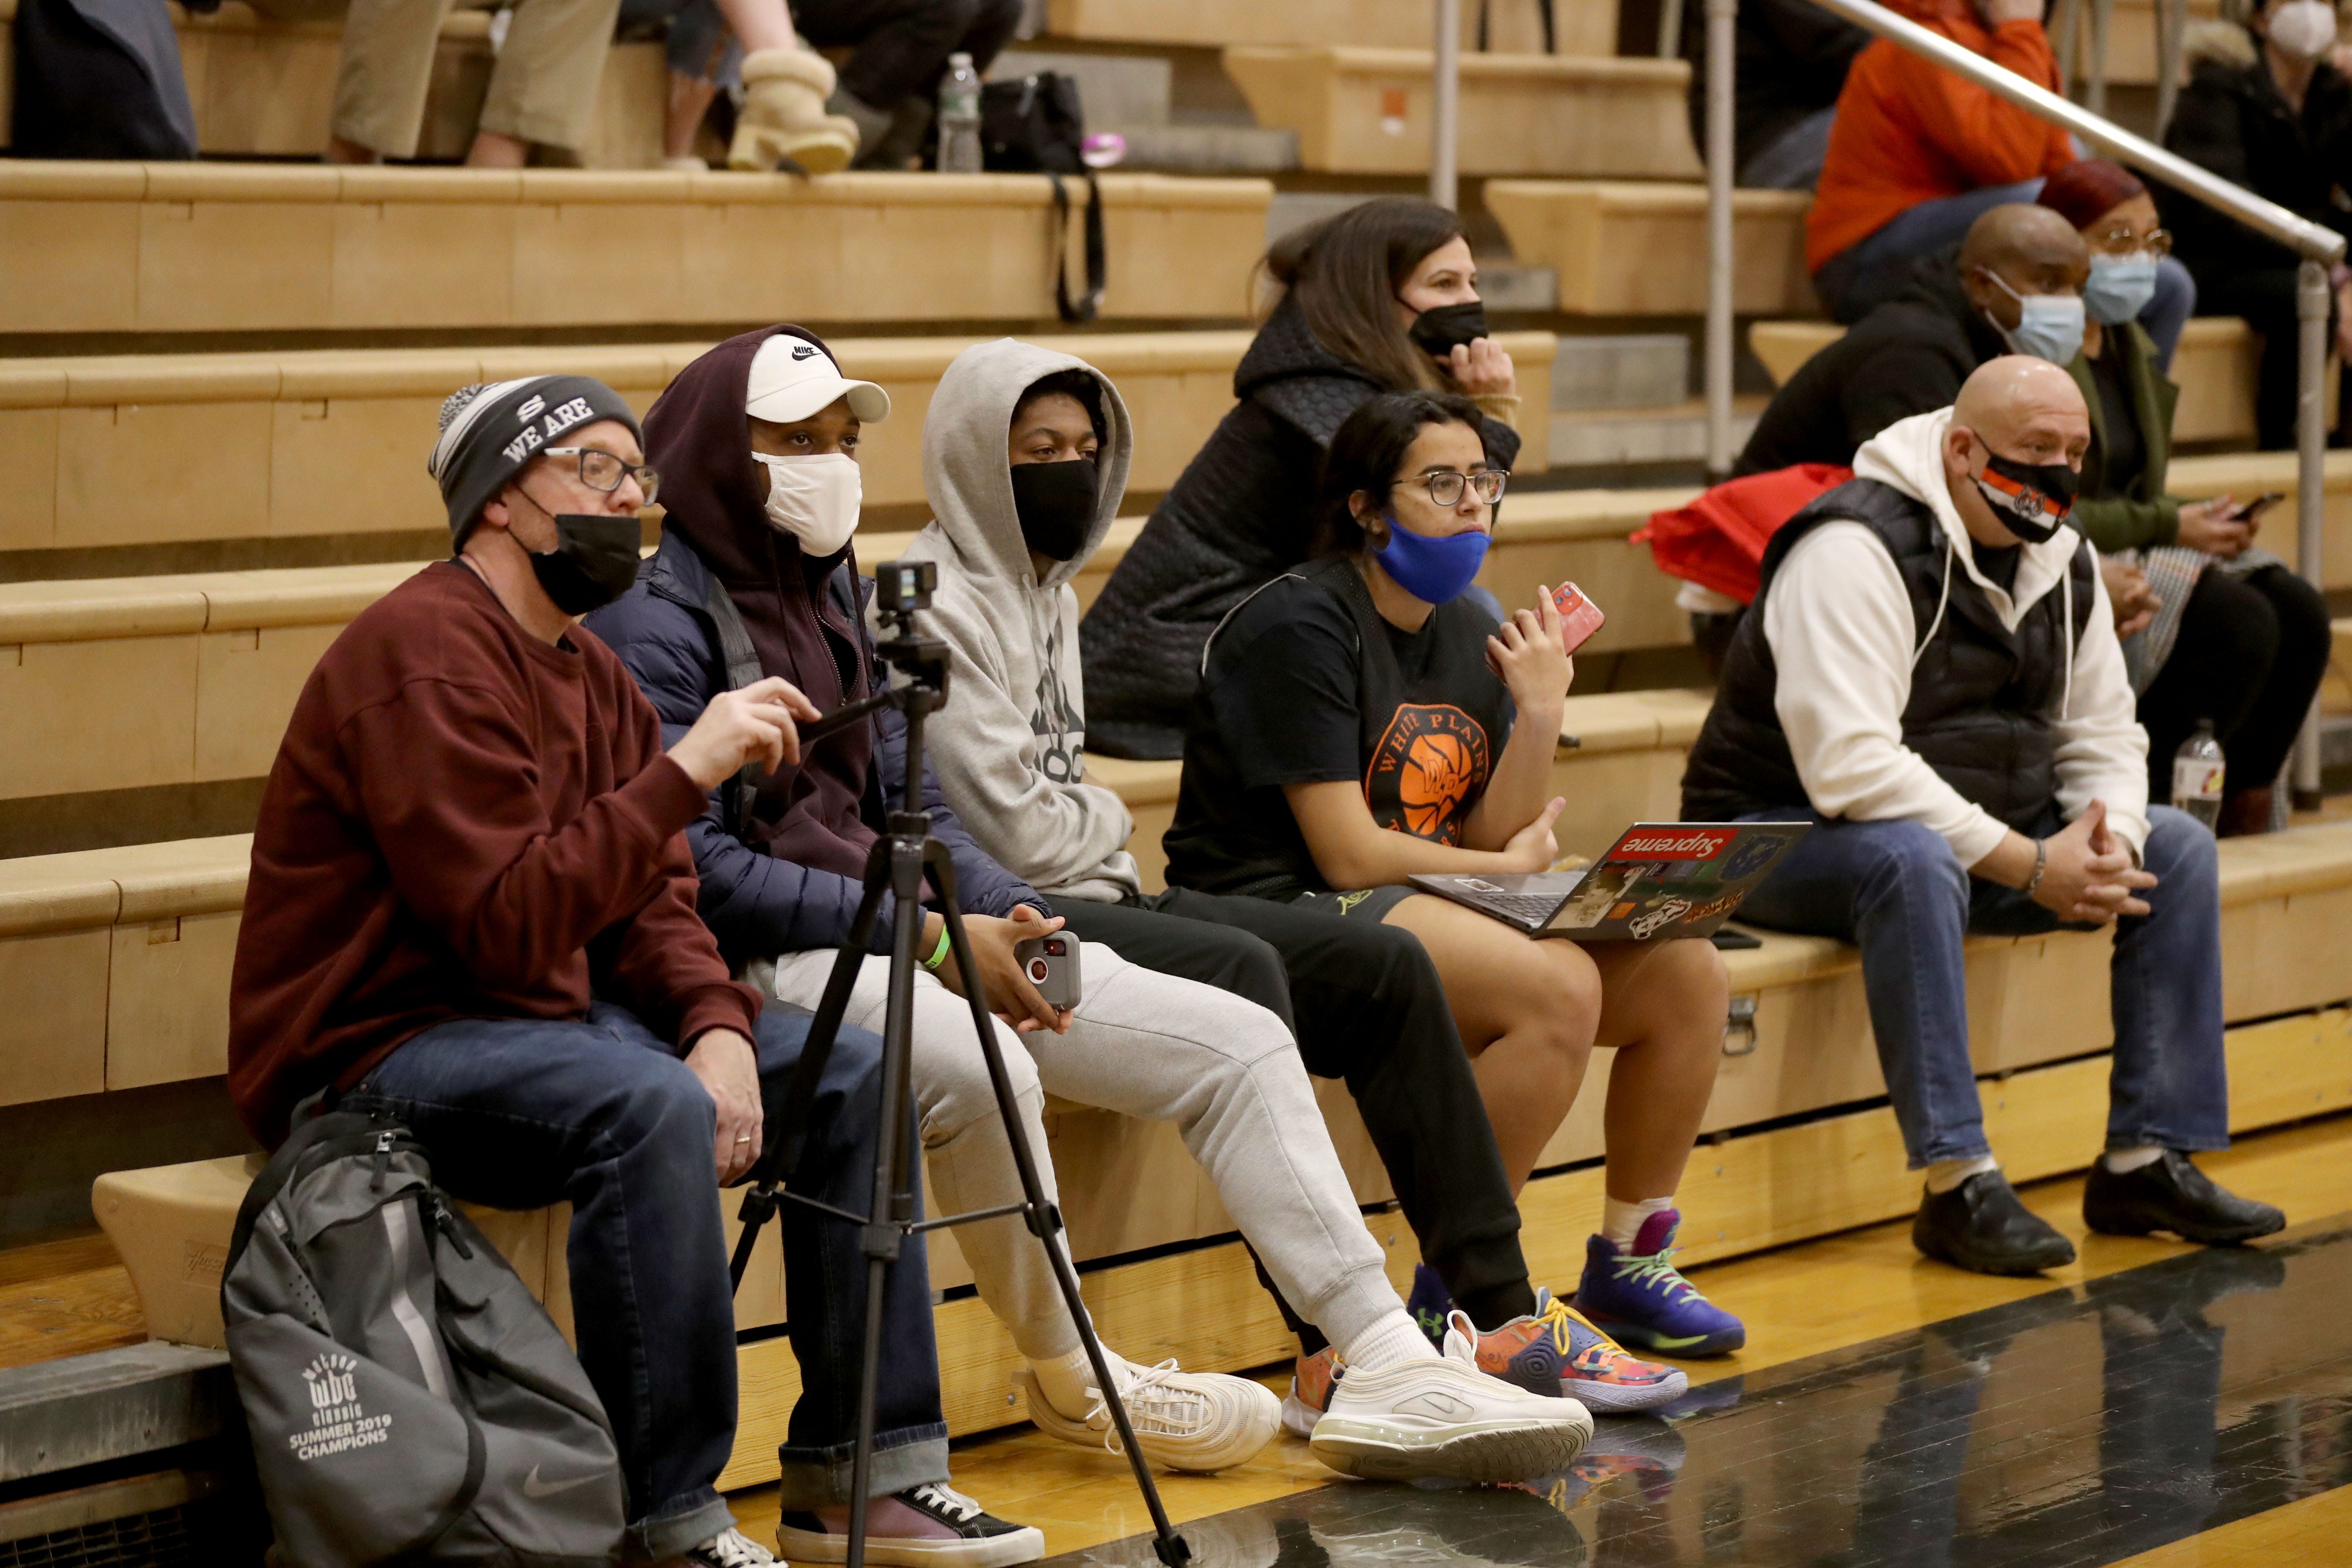 Fans wear masks in New York as they attend a girls basketball game between Scarsdale and White Plains at White Plains High School Jan. 31, 2022.